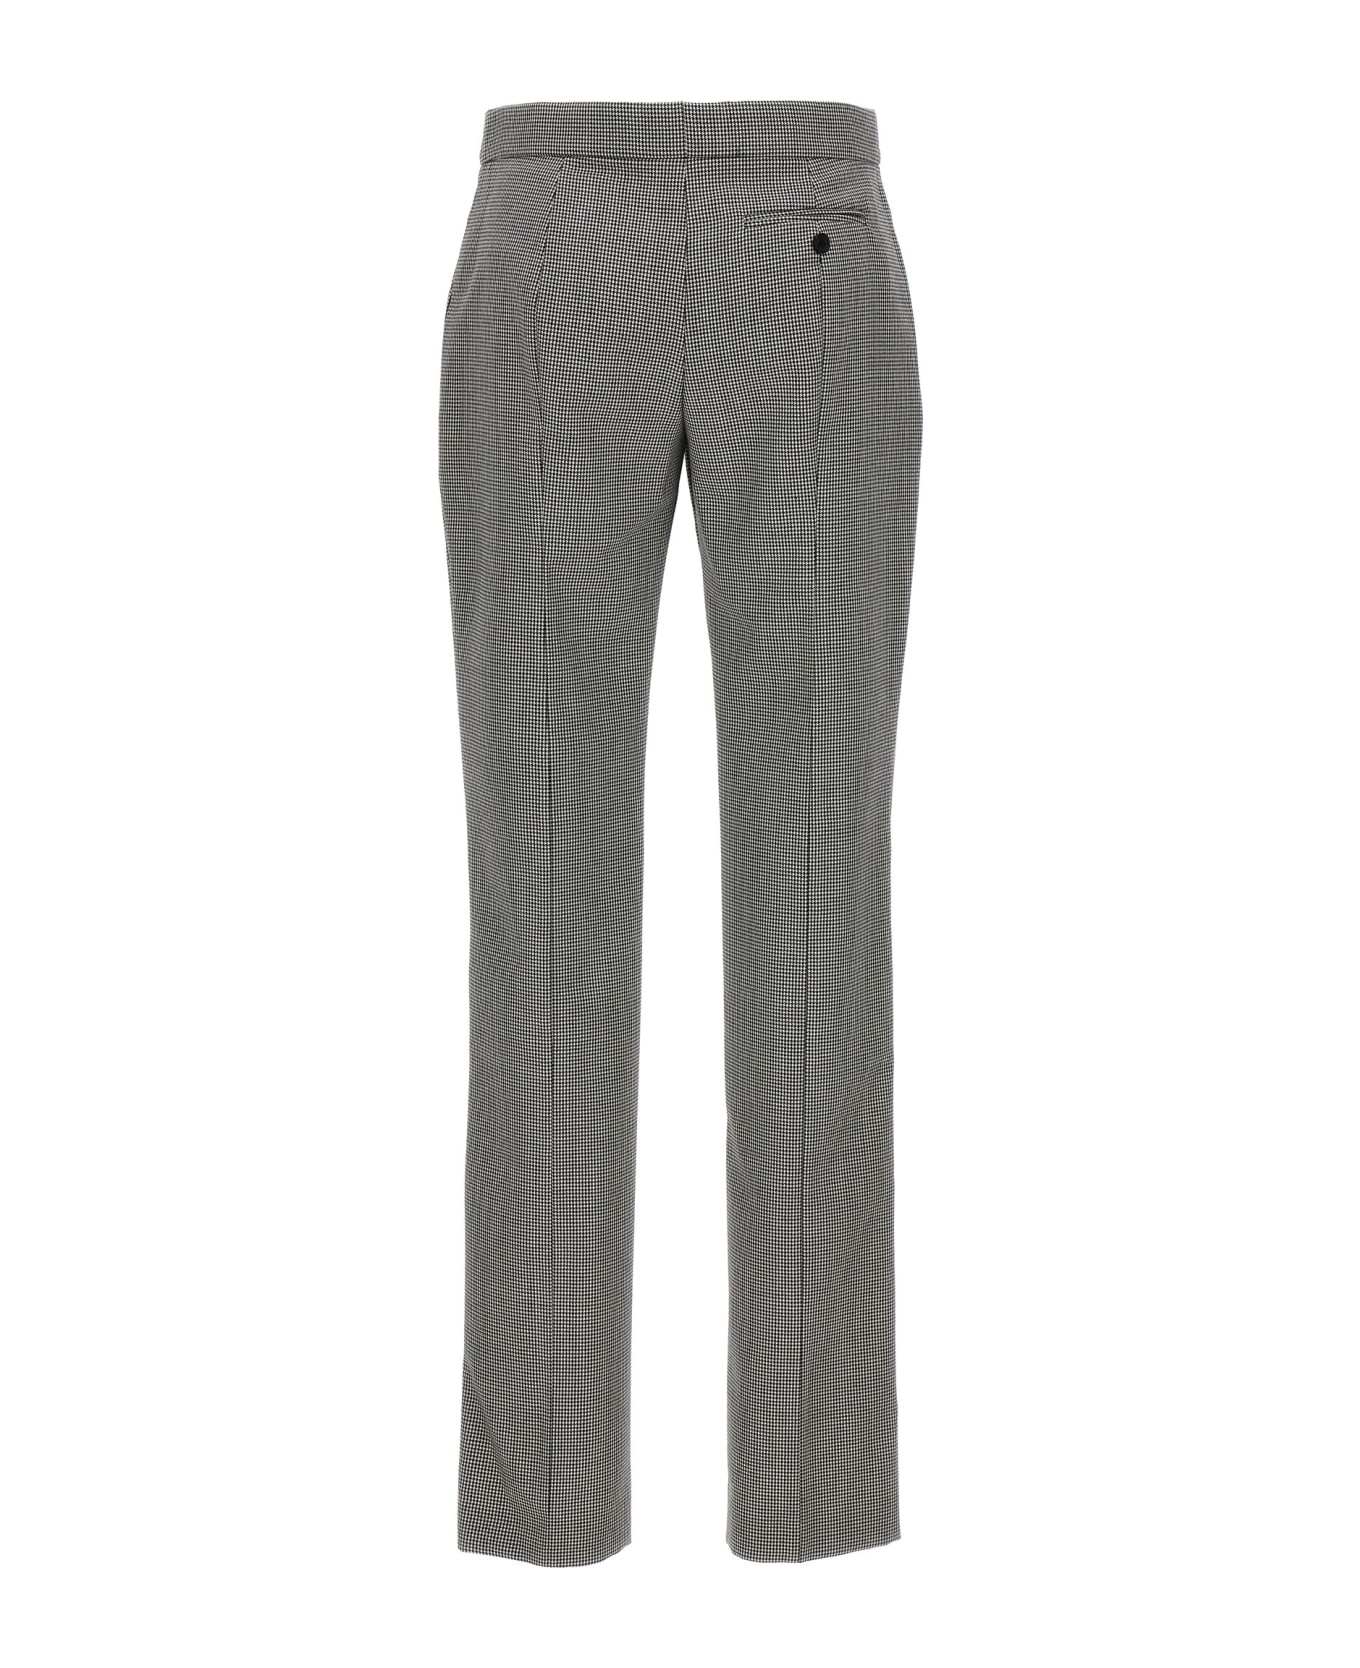 Alexander McQueen Tailored Pants With Houndstooth Motif In Wool - White/Black ボトムス